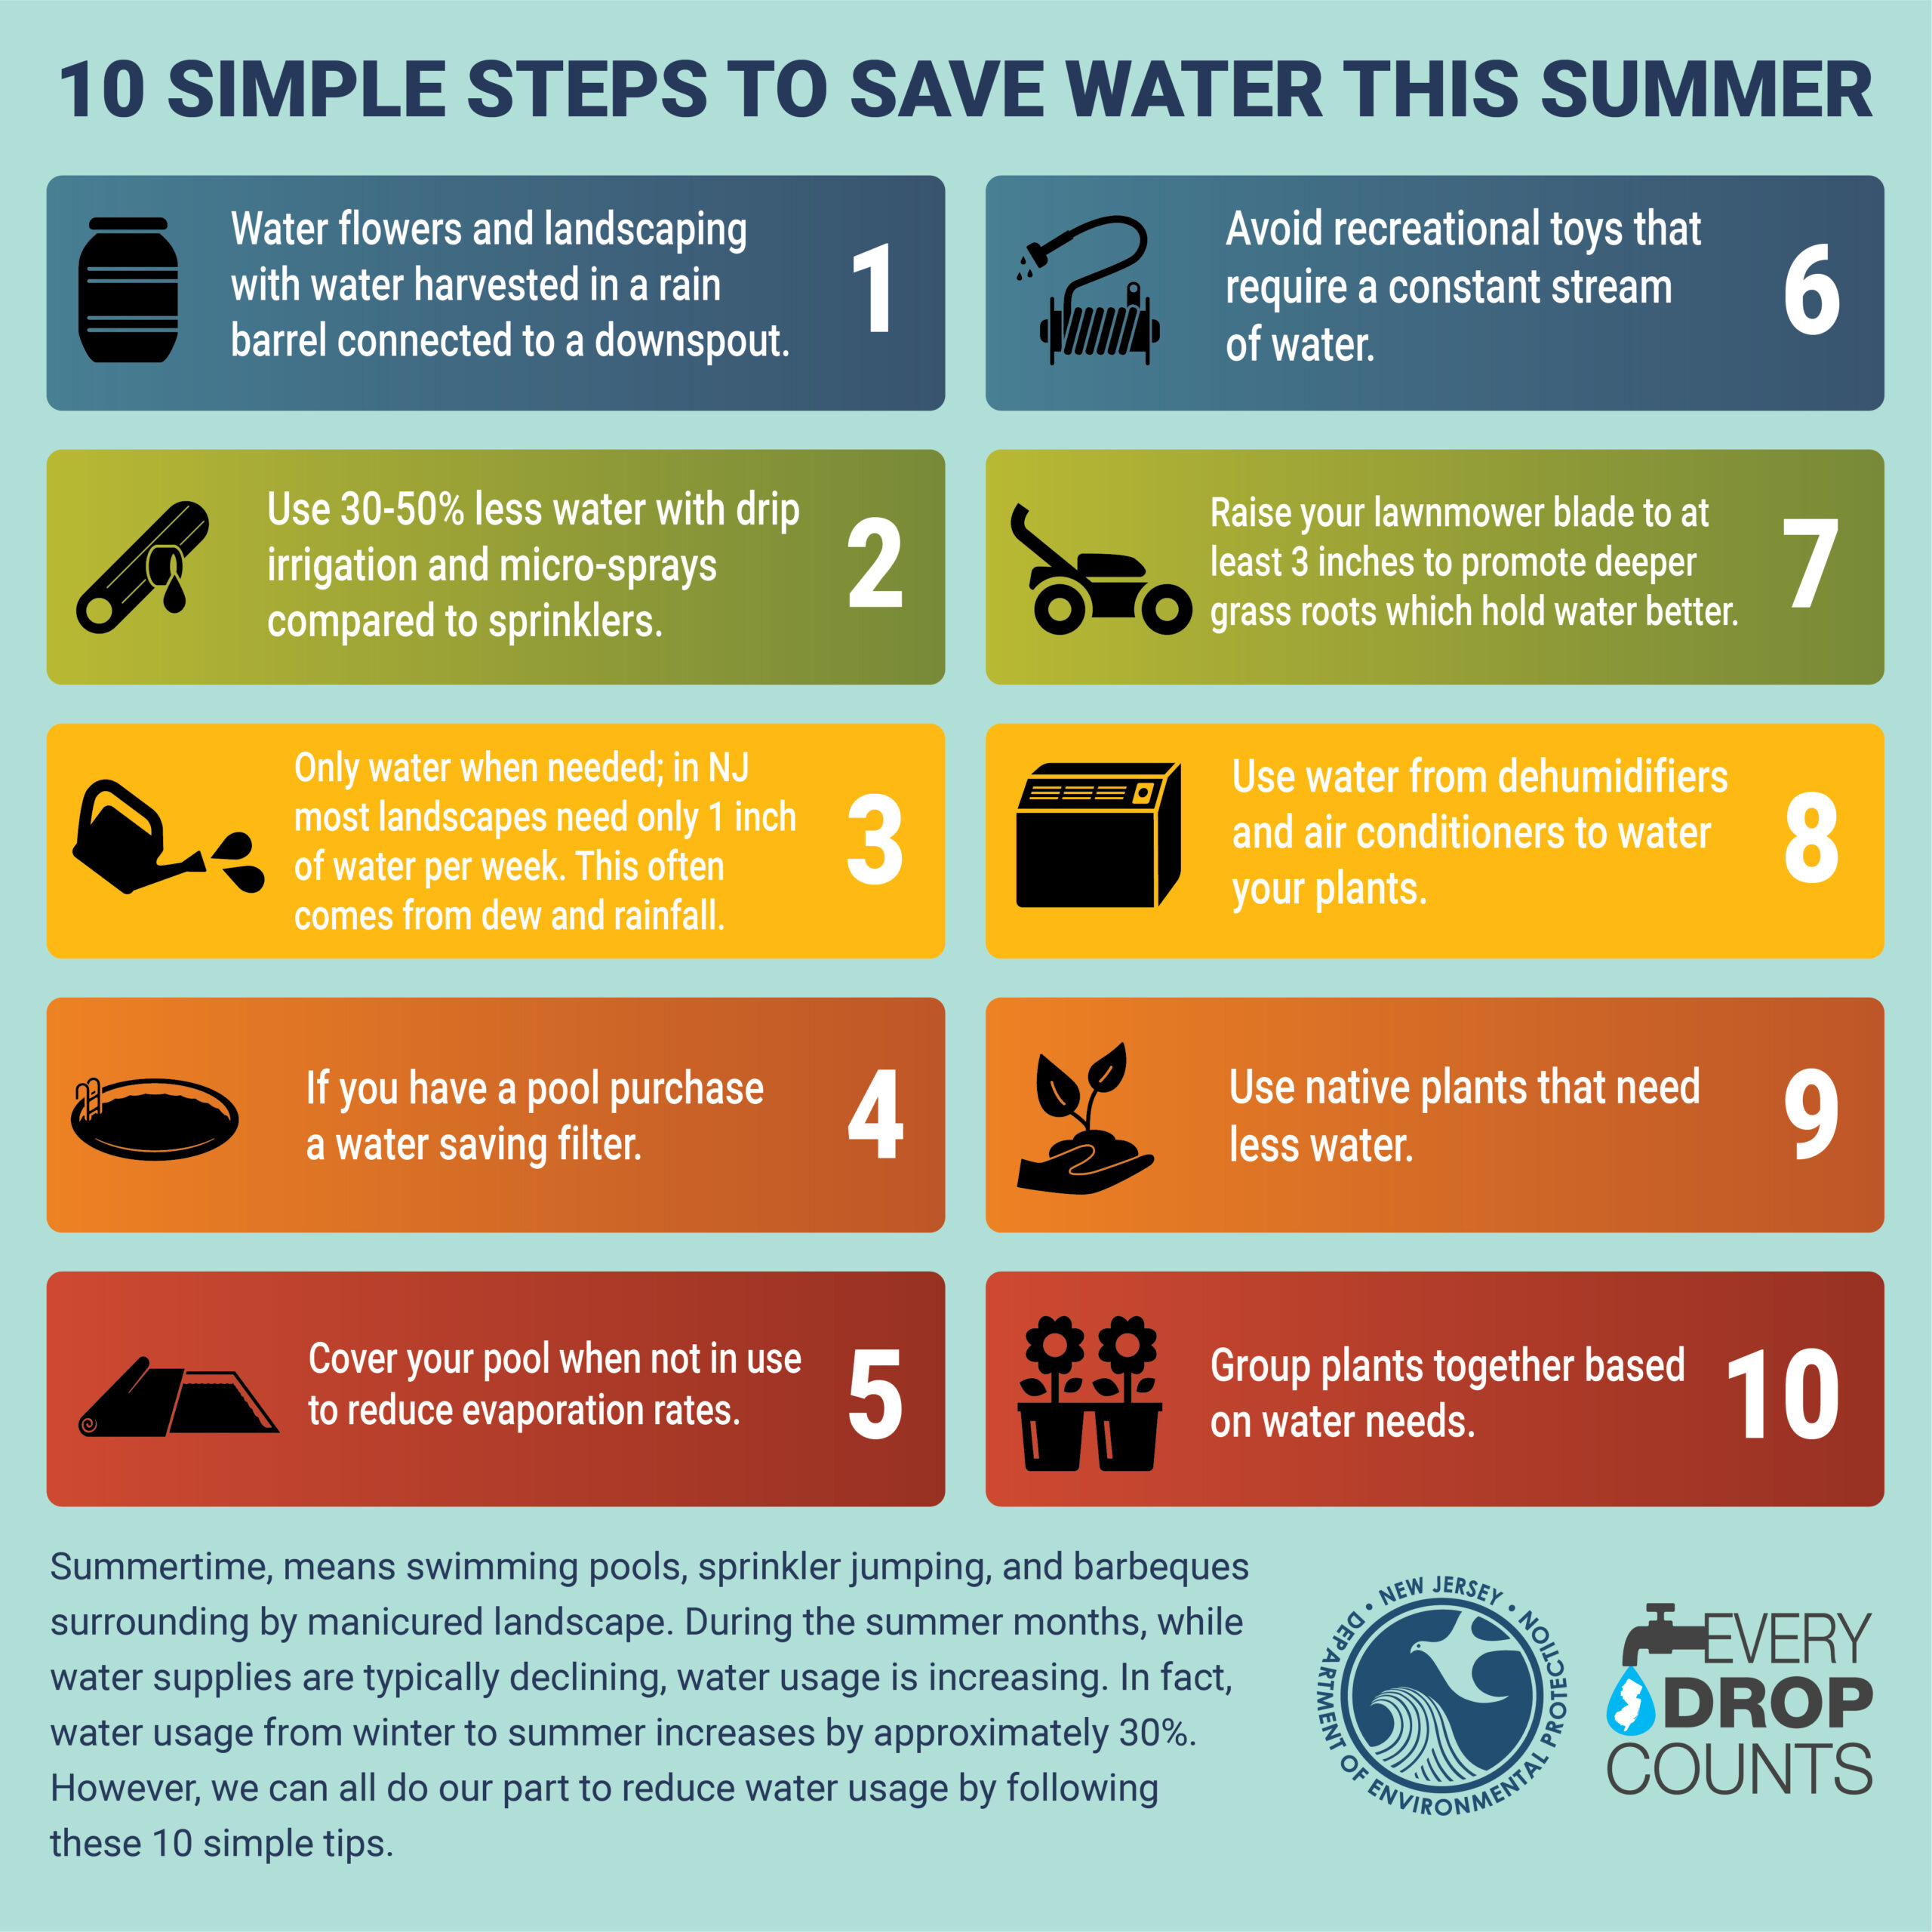 10 Simple Steps to Save Water This Summer